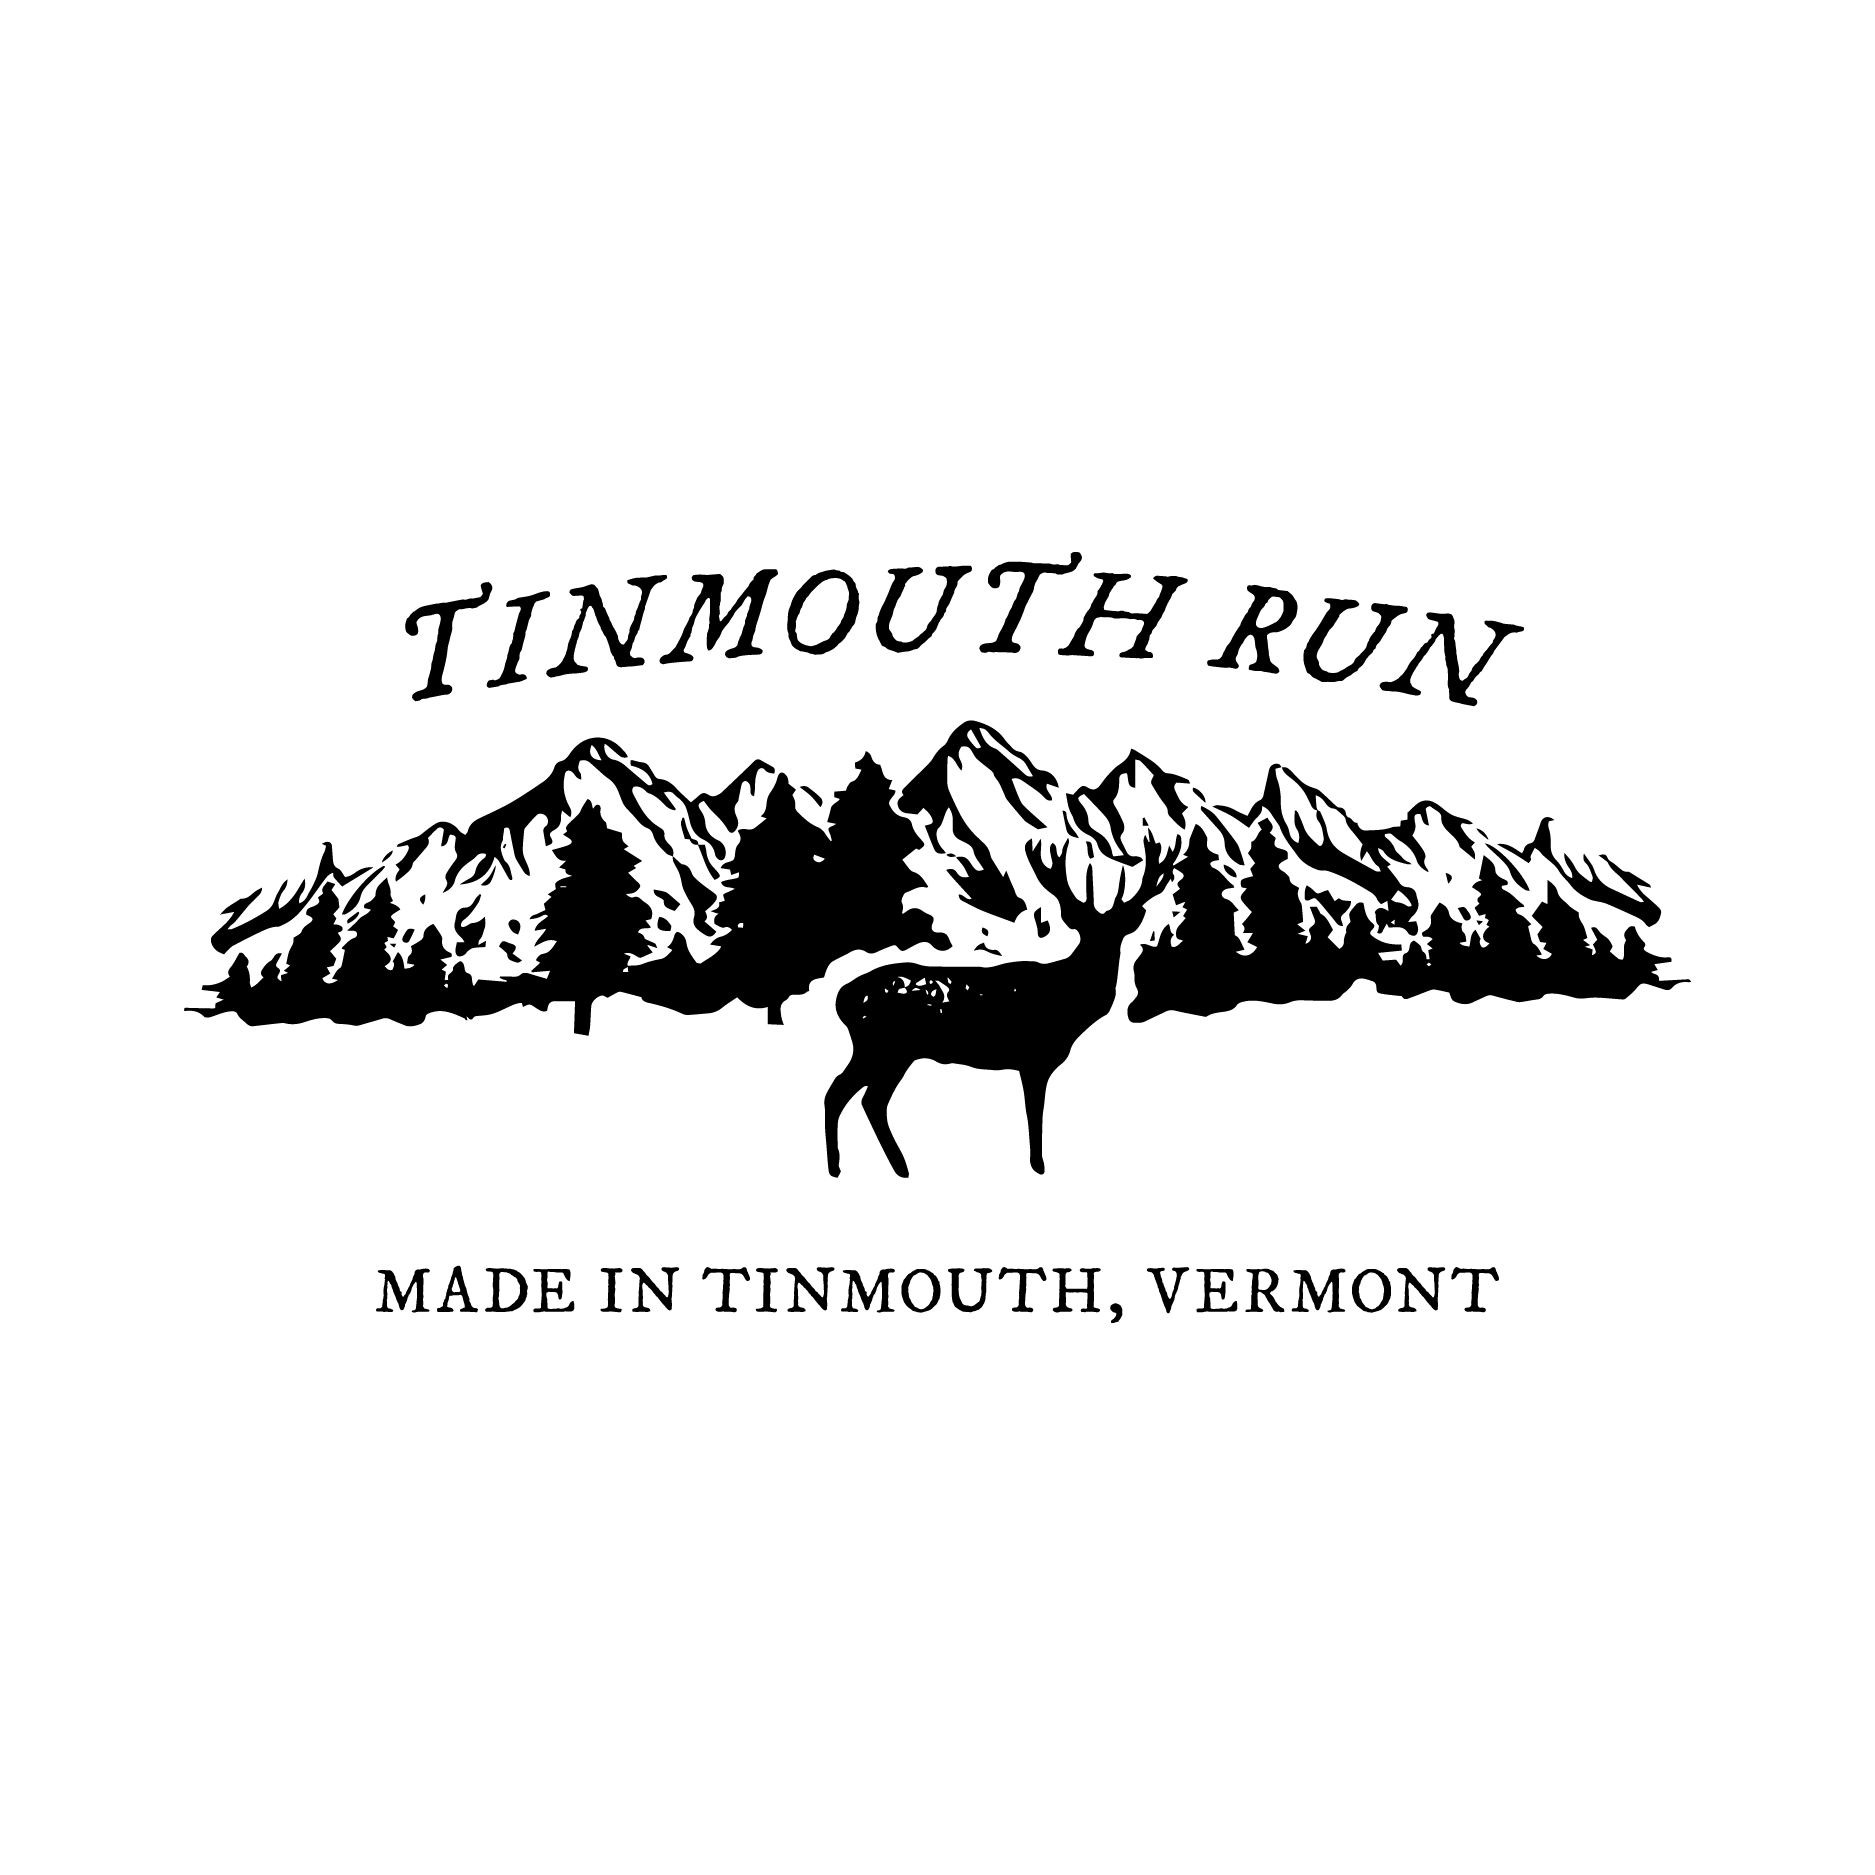 Tinmouth Run behance cover_behance project cover.png